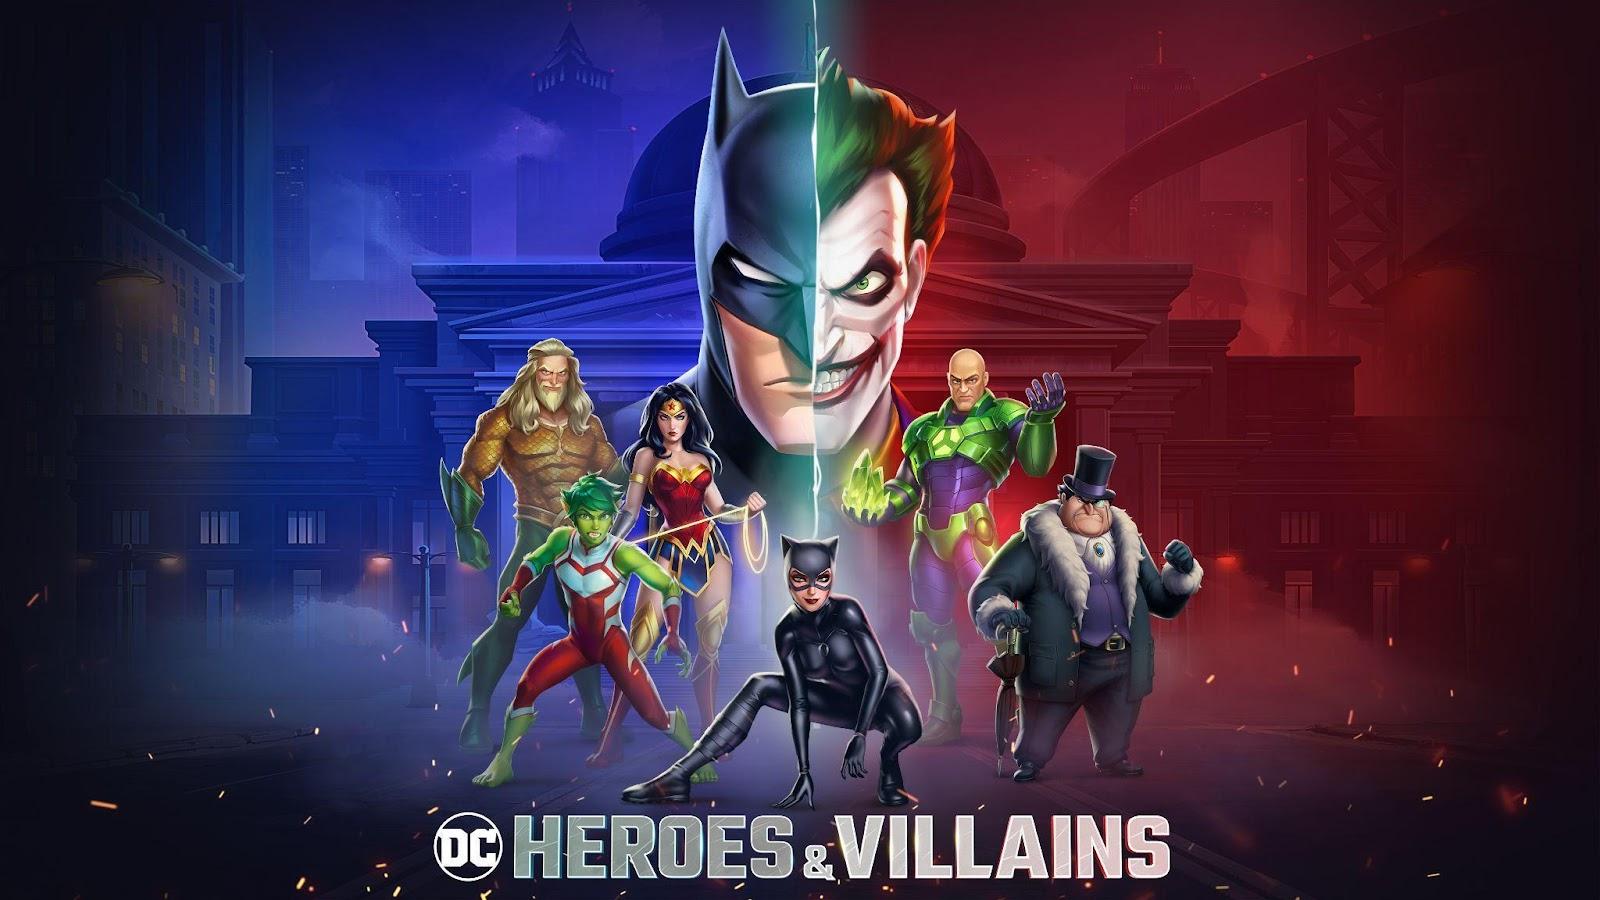 jam-city-unleashes-the-super-heroes-and-super-villains-of-the-dc-universe-in-epic-new-puzzle-rpg-game,-dc-heroes-&-villains